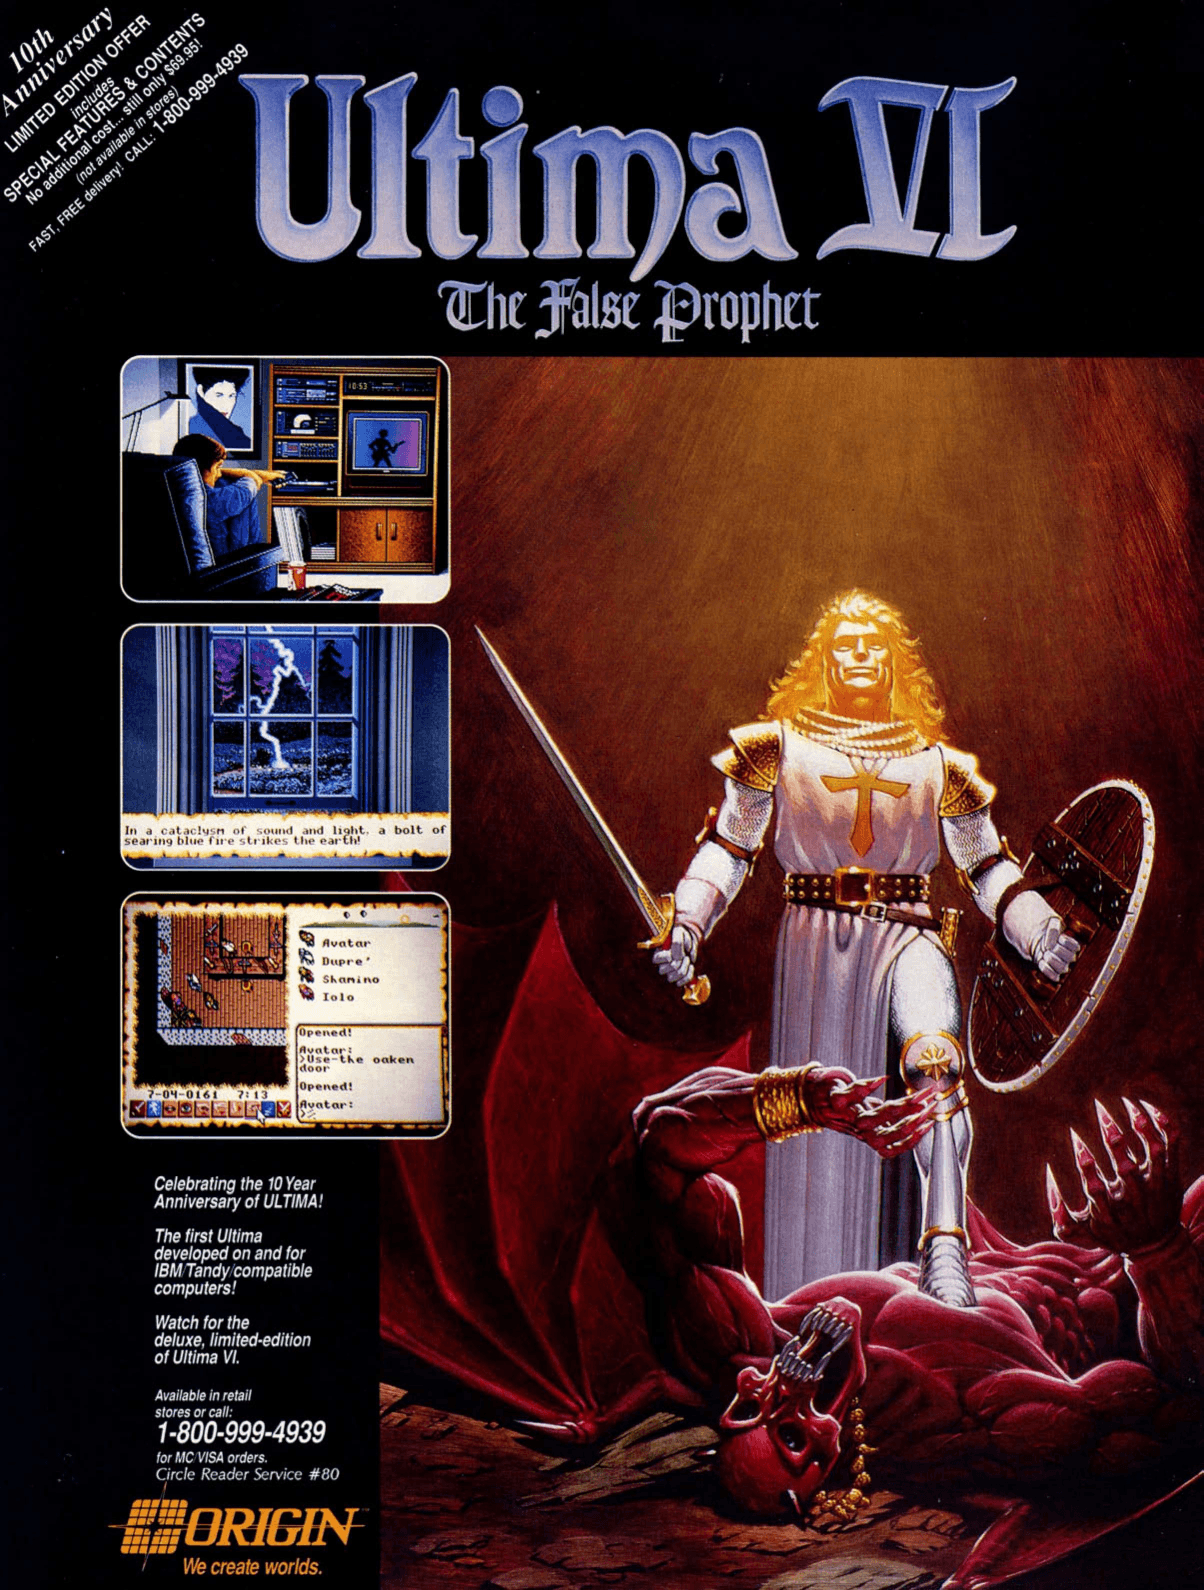 Image For Post | Ultima VI: The False Prophet, released by Origin Systems Inc. in 1990, is the sixth part in the role-playing video game series of Ultima. It is the third and final game in the "Age of Enlightenment" trilogy. Ultima VI sees the player return to Britannia, at war with a race of gargoyles from another land, struggling to stop a prophecy from ending their race. The player must help defend Britannia against these gargoyles, and ultimately discover the secrets about both lands and its peoples.